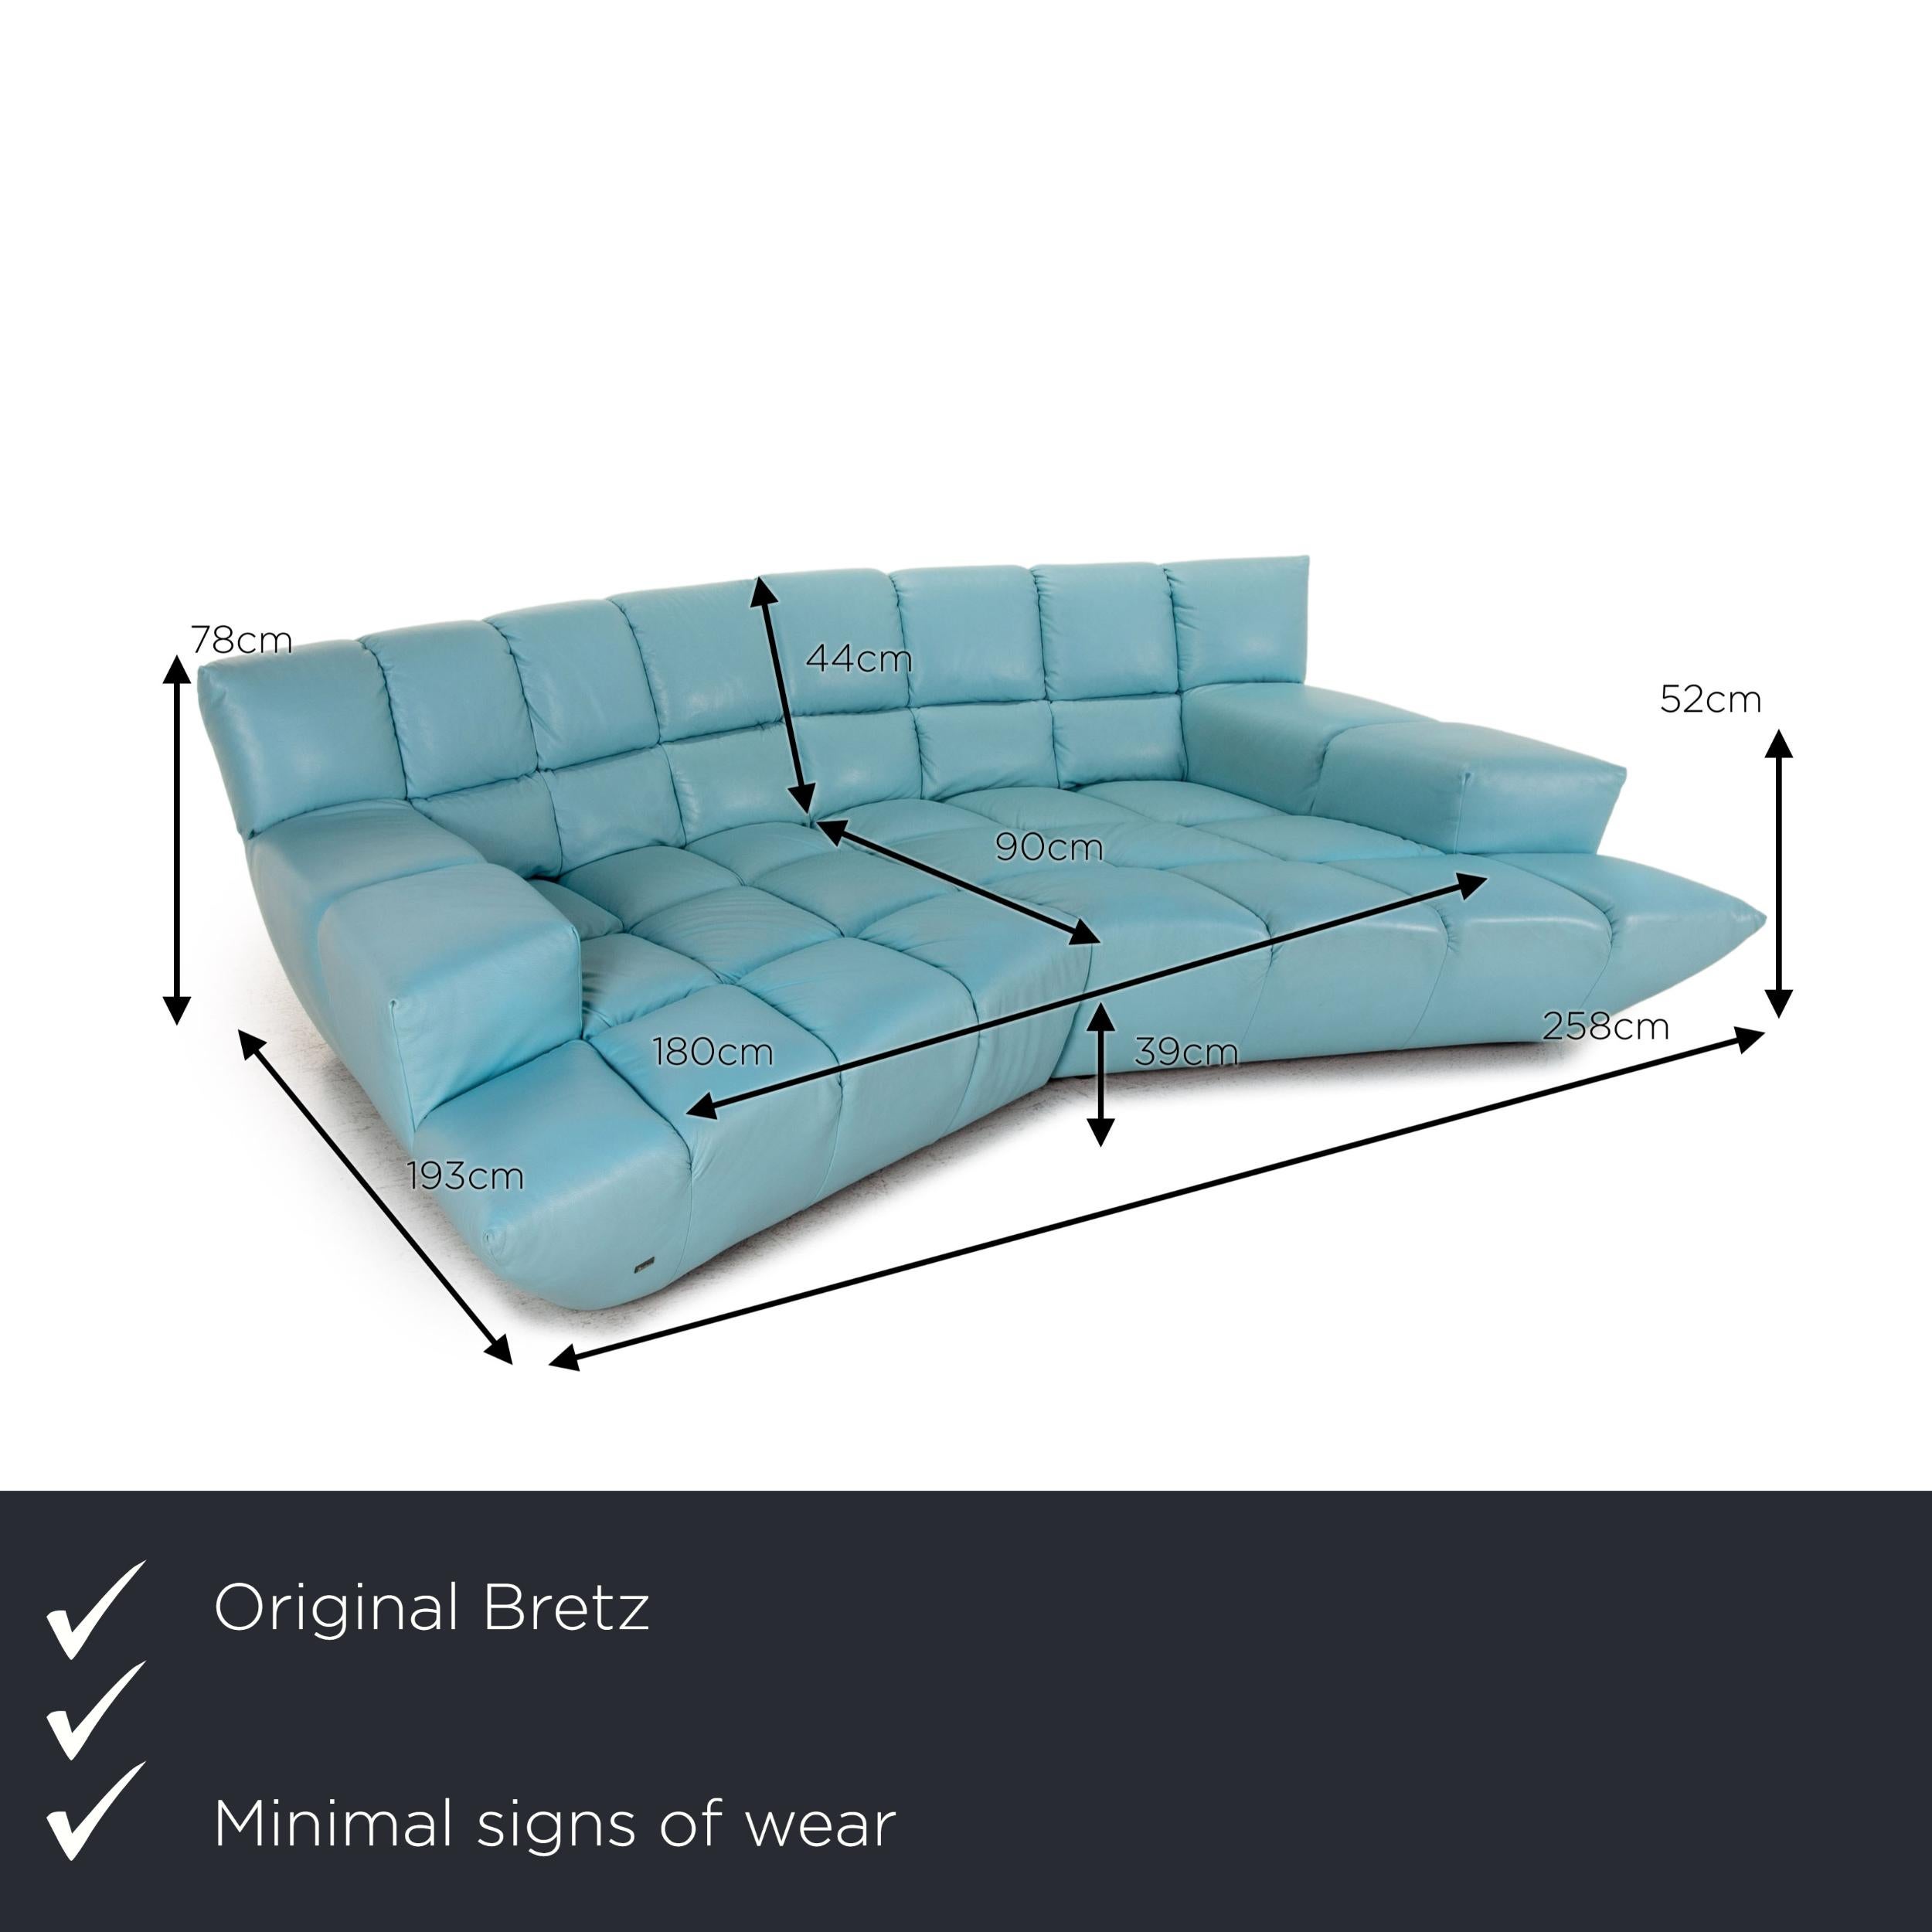 We present to you a Bretz Cloud 7 leather sofa light blue blue corner sofa modular extendable couch.

Product measurements in centimeters:

depth: 193
width: 258
height: 78
seat height: 39
rest height: 52
seat depth: 90
seat width: